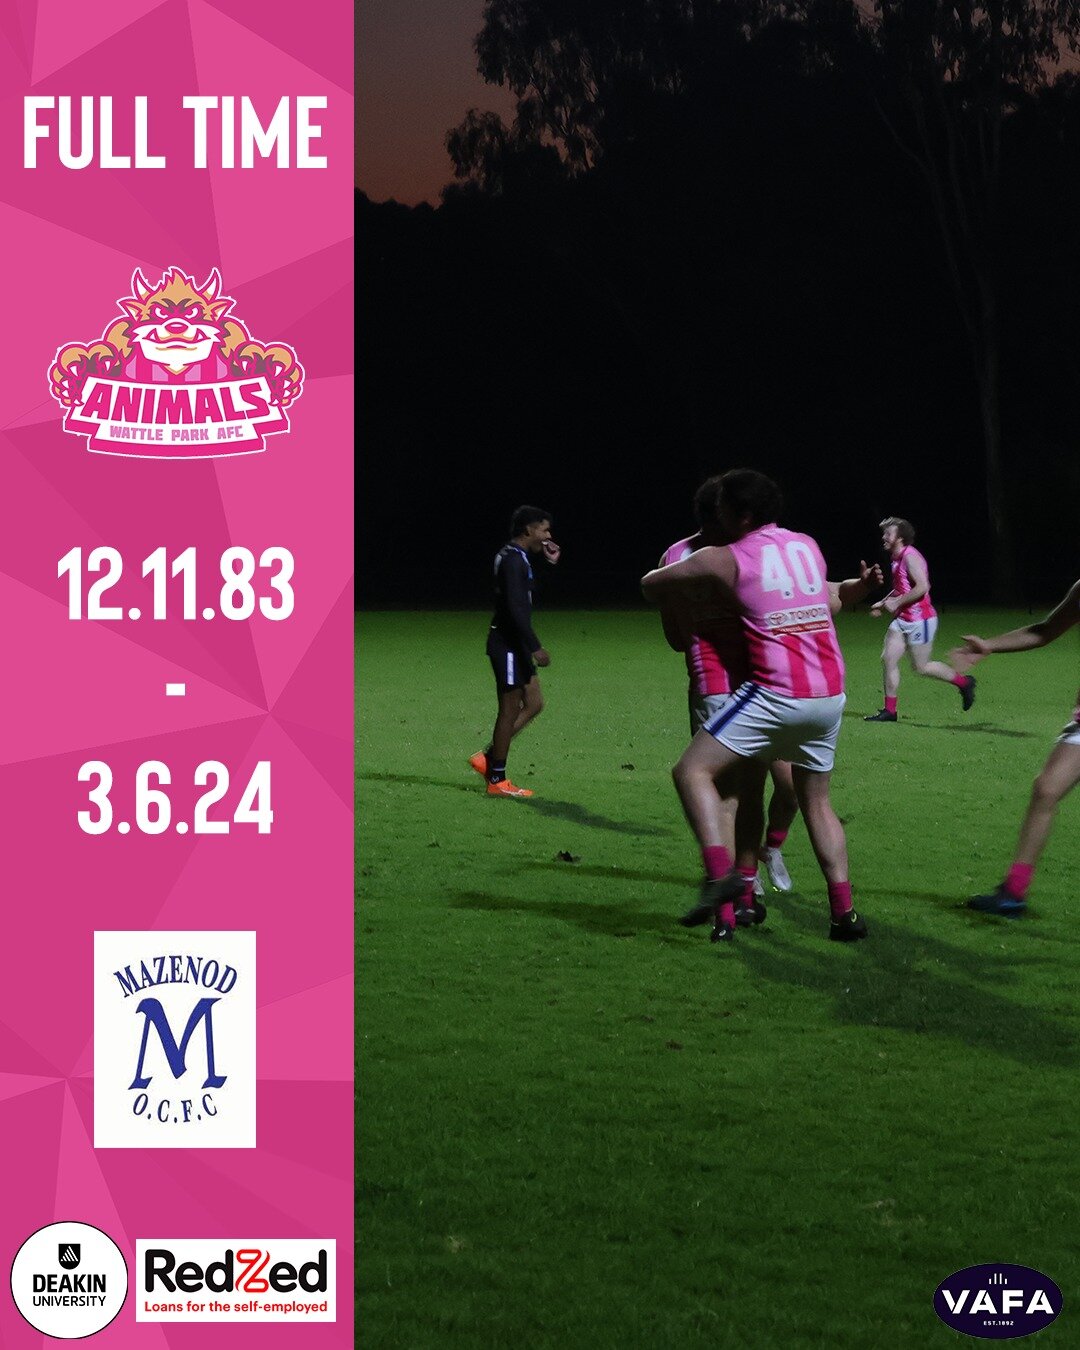 FINAL RESULTS

The Seniors were unable to hold on but the Thirds let their footy do the talking with a comprehensive win

#WPvHAW #WPvMAZ #AnimalsFooty